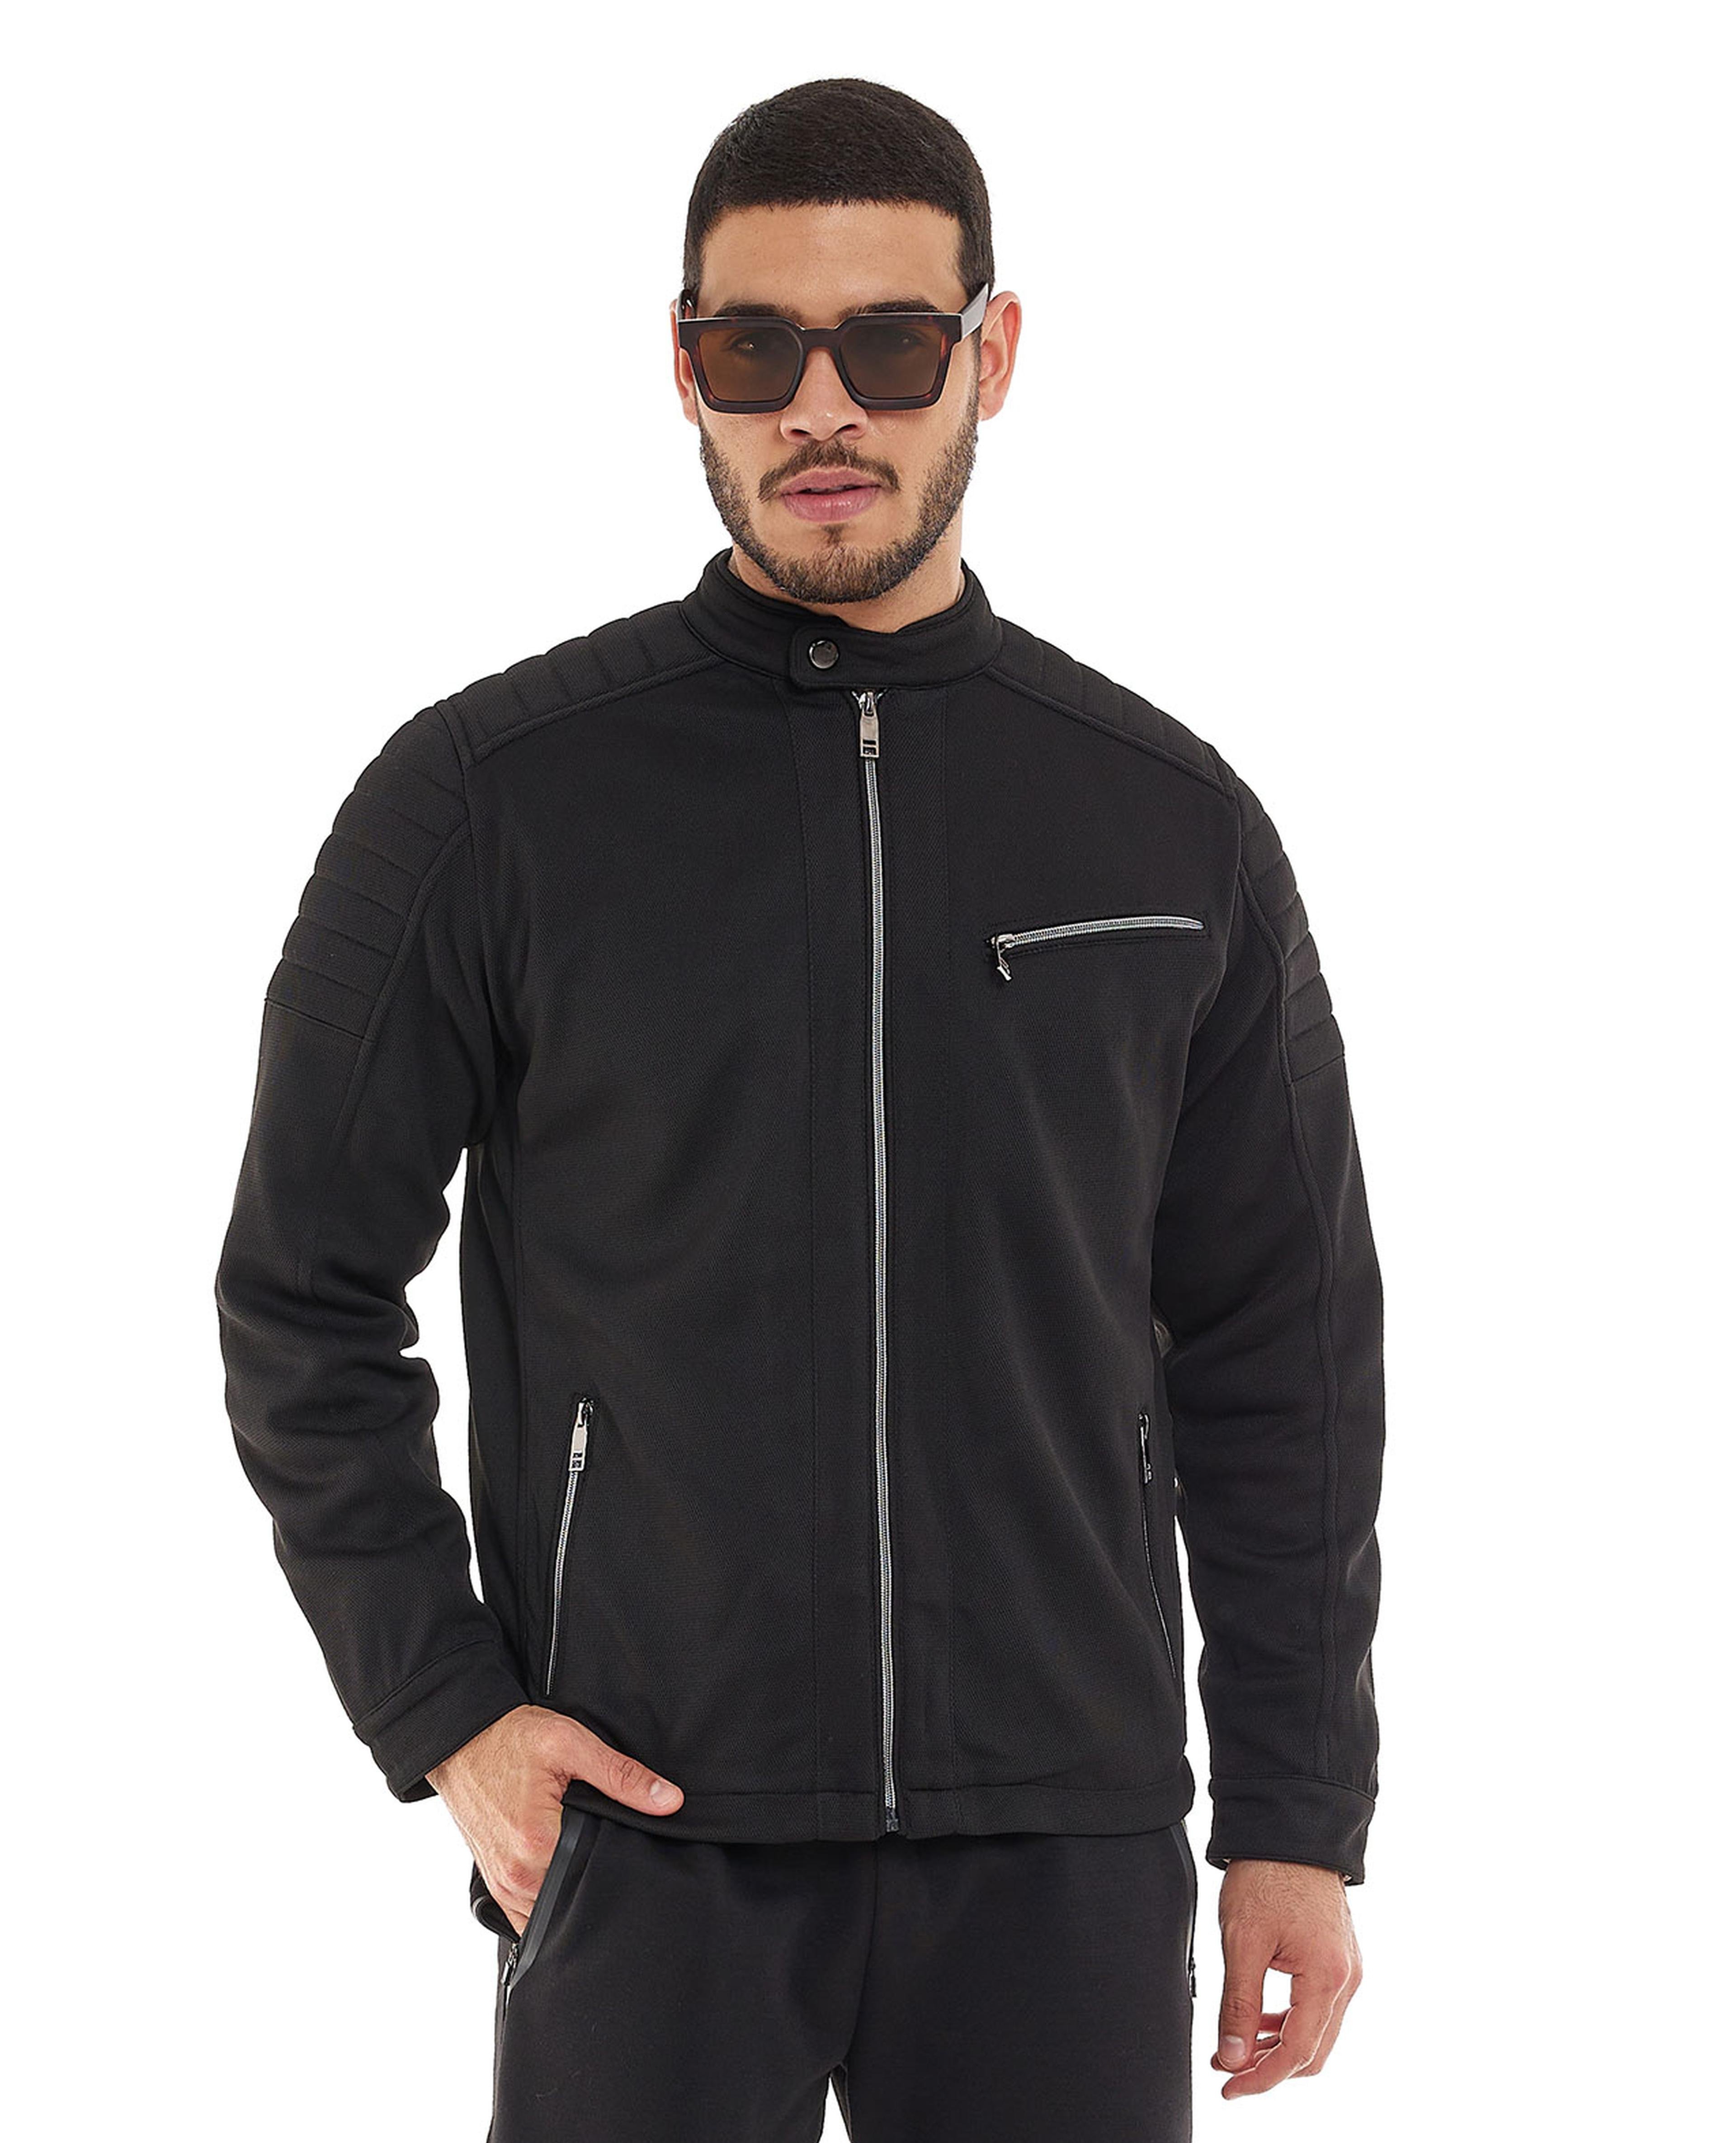 Solid Jacket with Zipper Closure